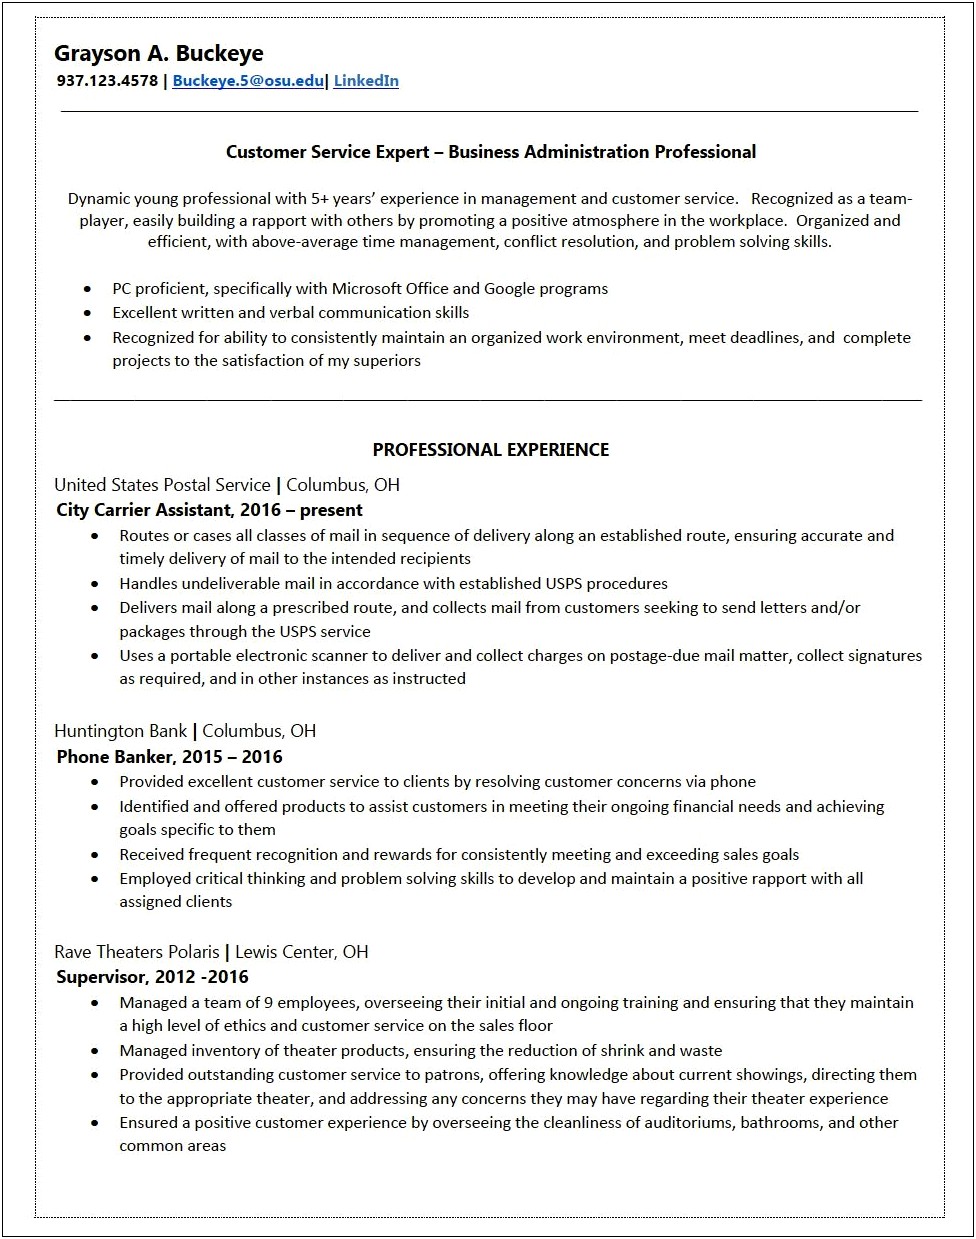 Ohio State Office Of Career Management Resume